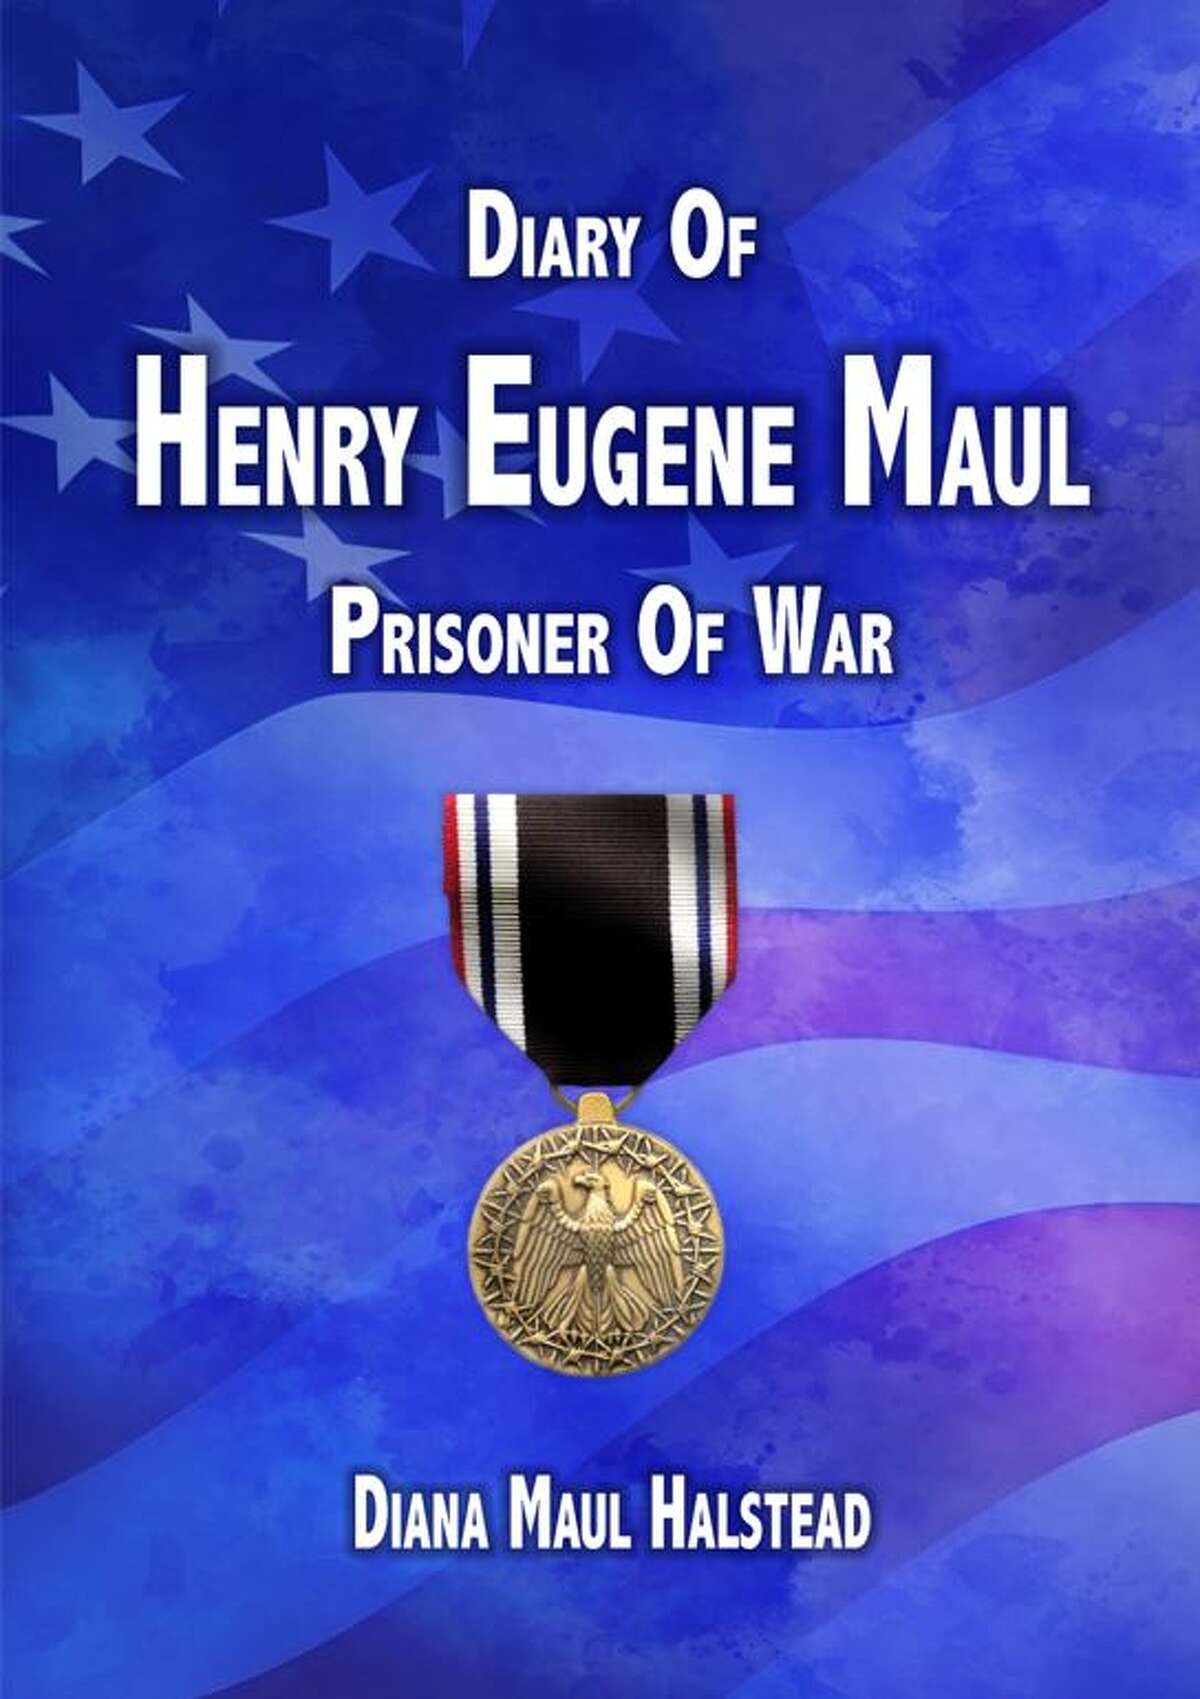 Diary of Henry Eugene Maul, Prisoner of War, is a compilation of drawings, poems and notes by an Alton World War II prisoner of war.